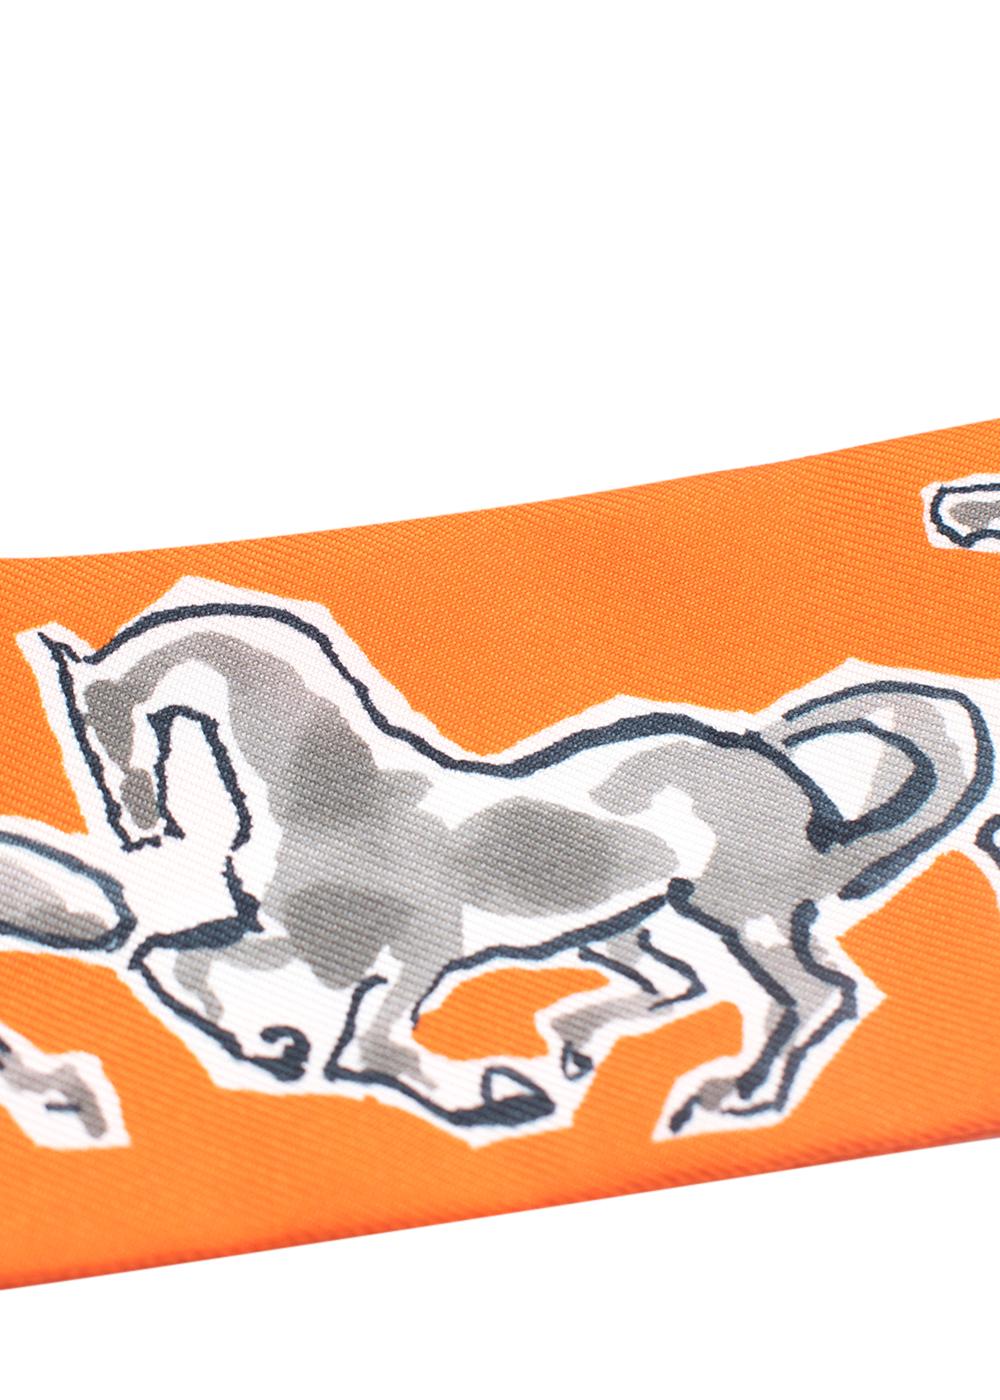 Orange/Gris Argent Chevaux en Liberte Twilly In New Condition For Sale In London, GB